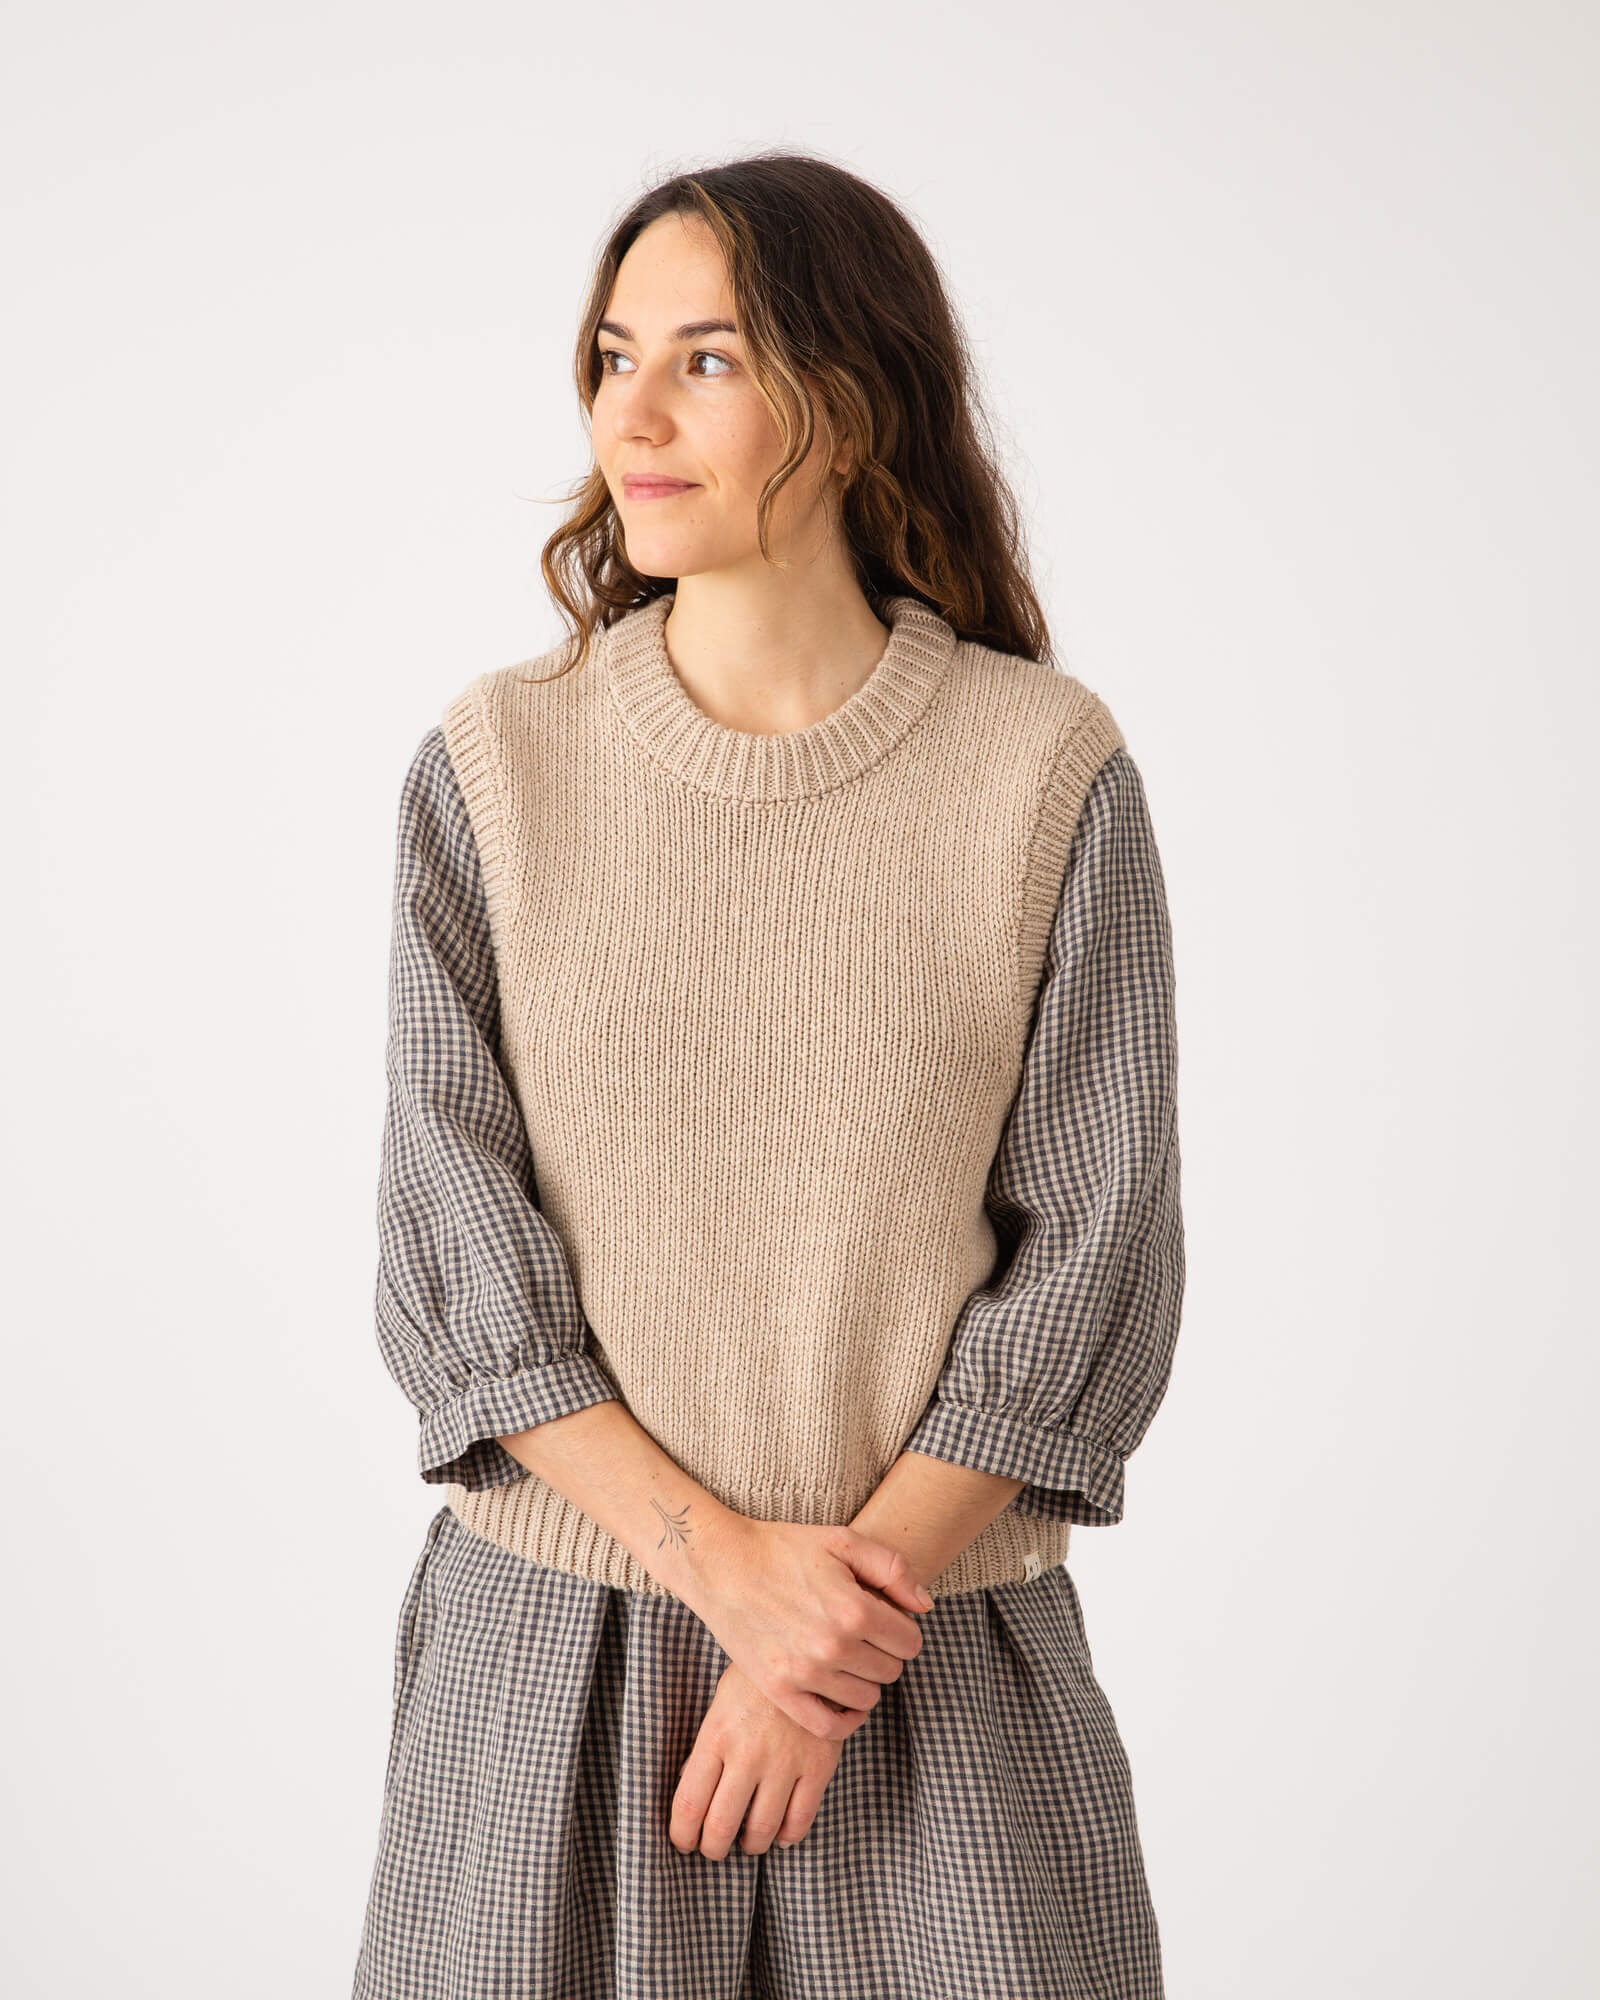 Brown limestone sweater vest made from recycled wool from Matona